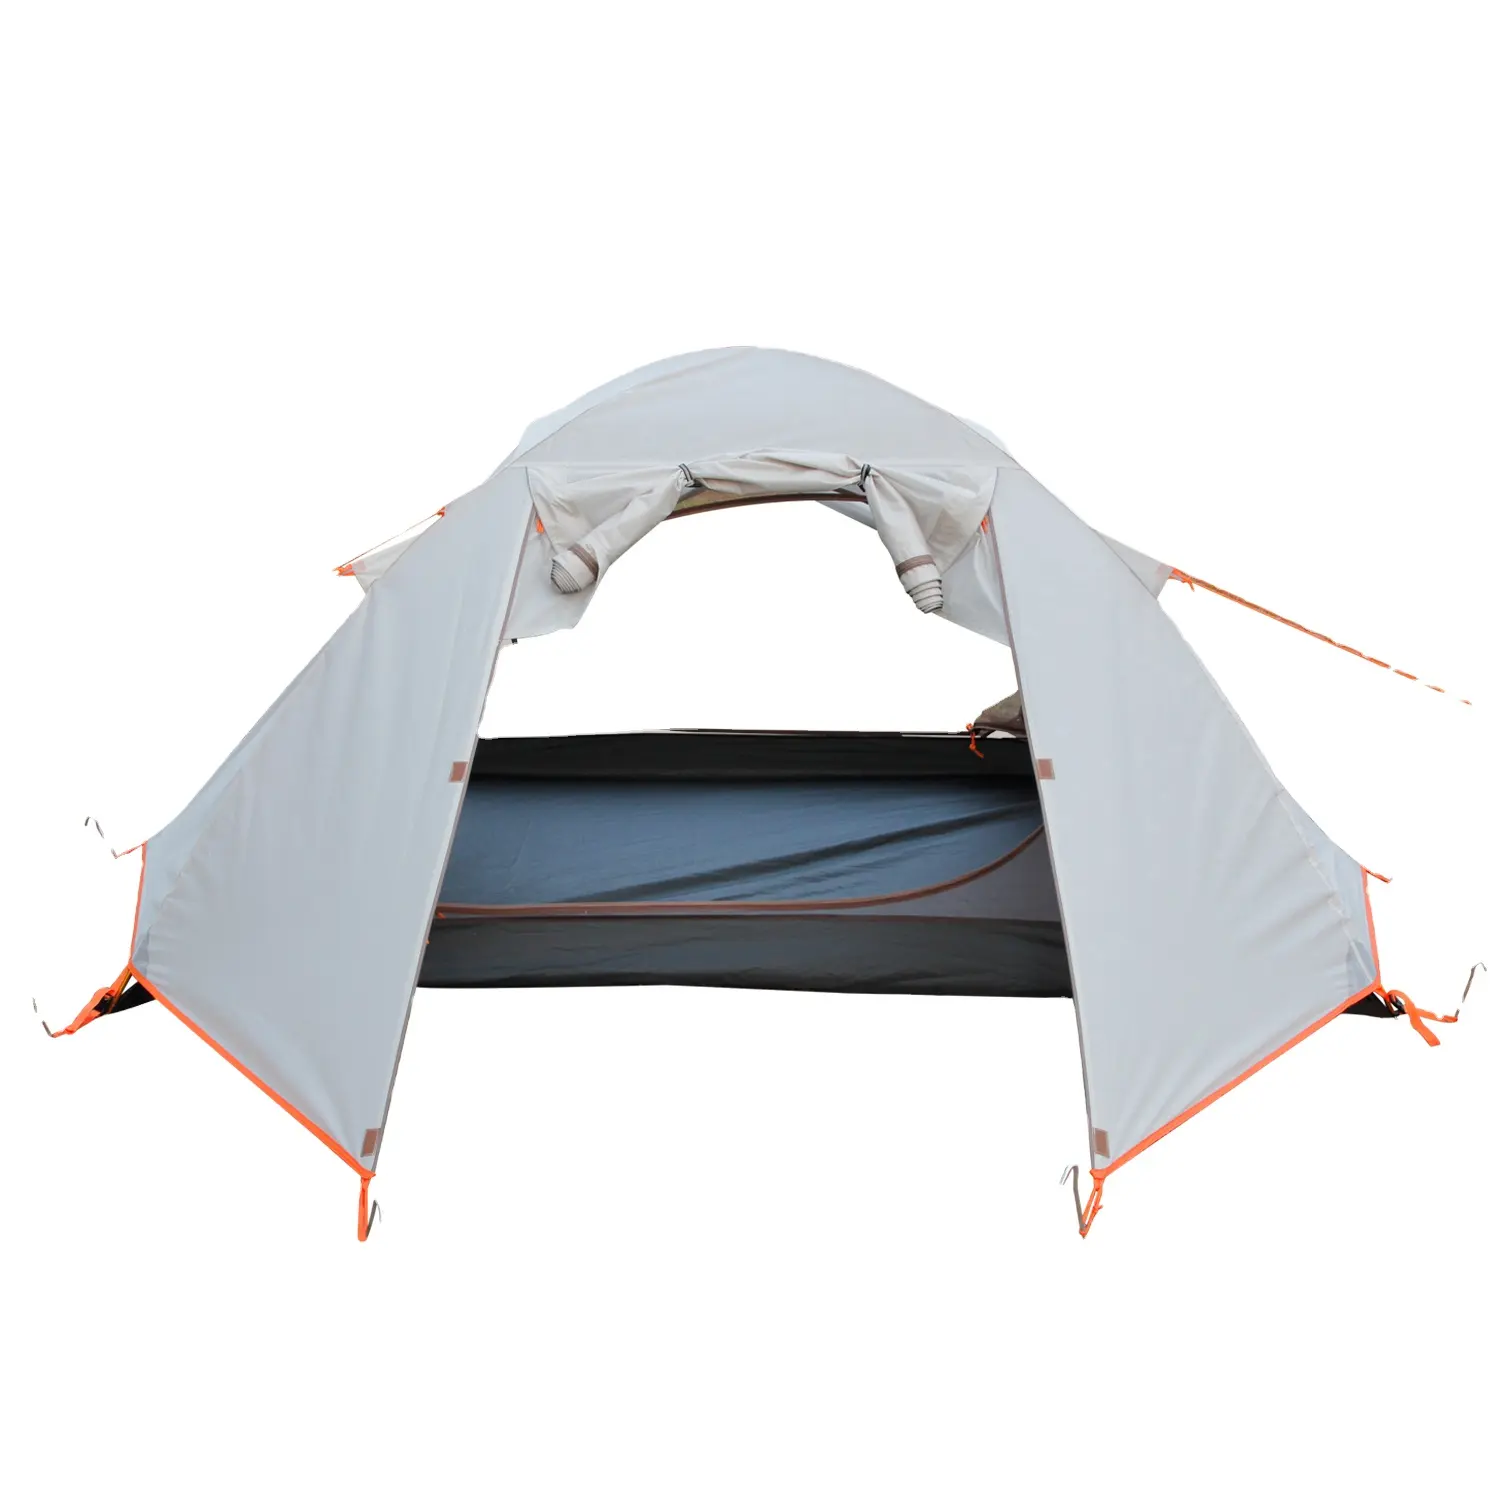 ABRIS WZFQ Ultralight 2-Person Aluminum Pole Tent Cot Double Layer Winter Outdoor Camping Tent with Vestibule for Hiking